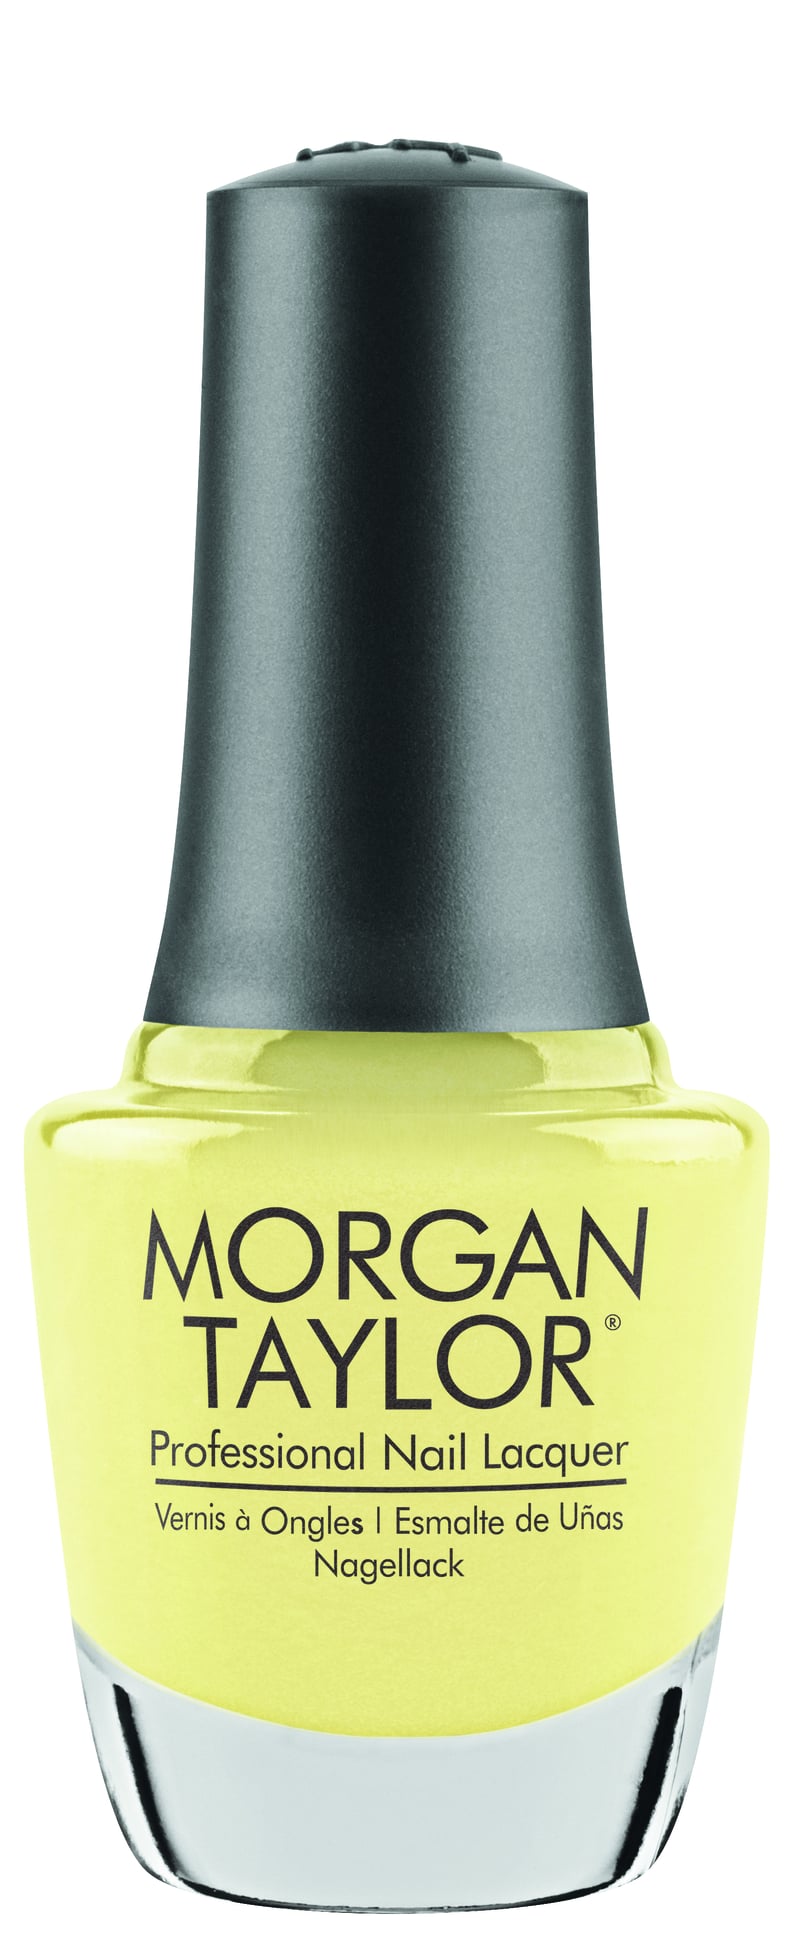 Morgan Taylor Professional Nail Lacquer in Days in the Sun